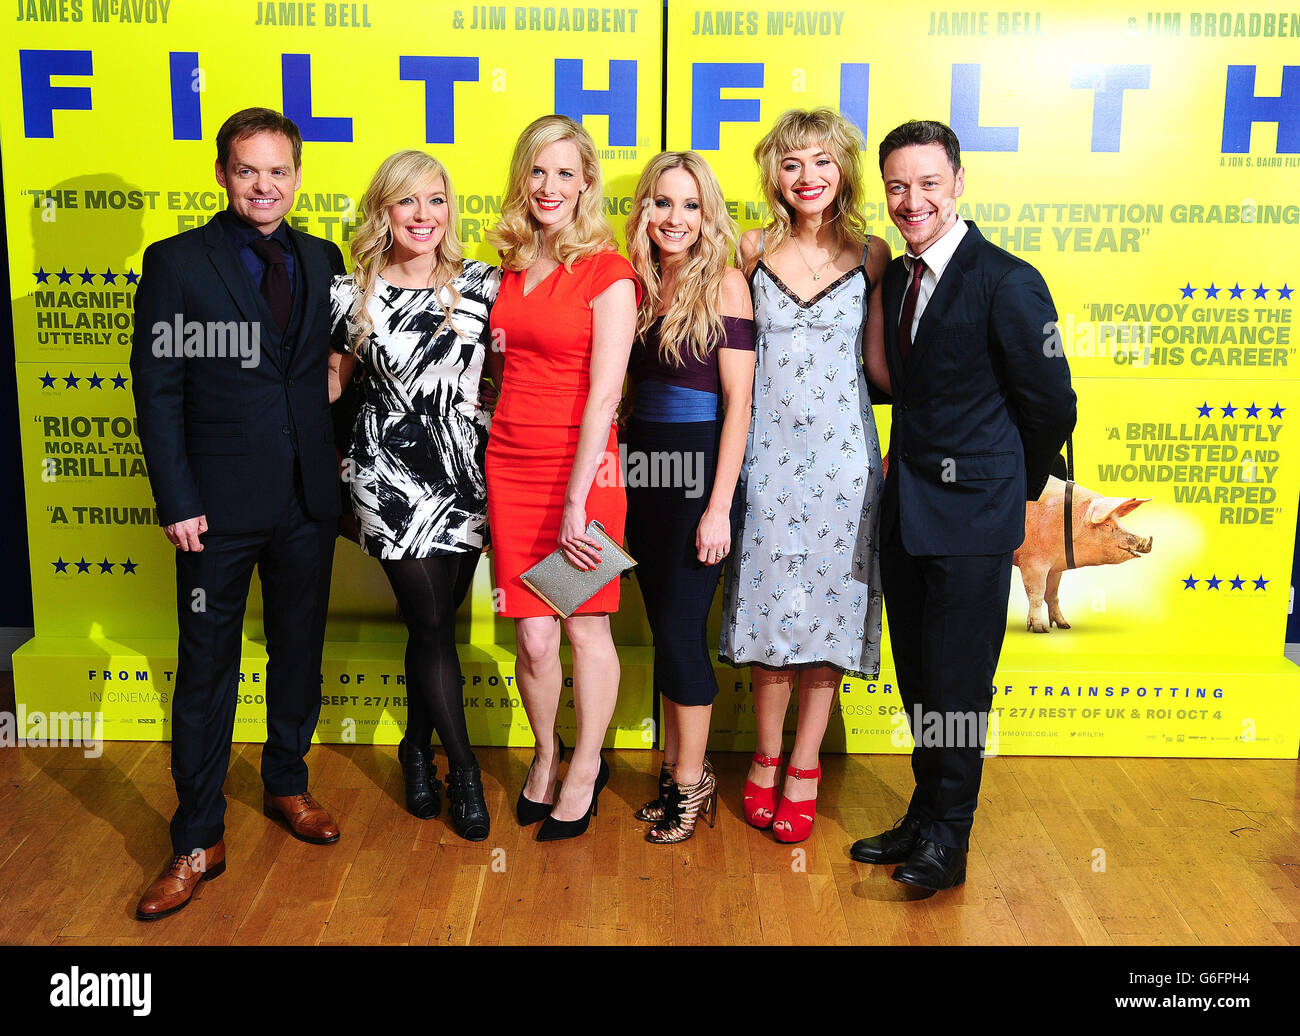 Jon S Baird, Joy McAvoy, Shauna Macdonald, Joanne Froggatt, Imogen Poots and James McAvoy arrive at the premiere of Filth at the Odeon West End in London. Stock Photo